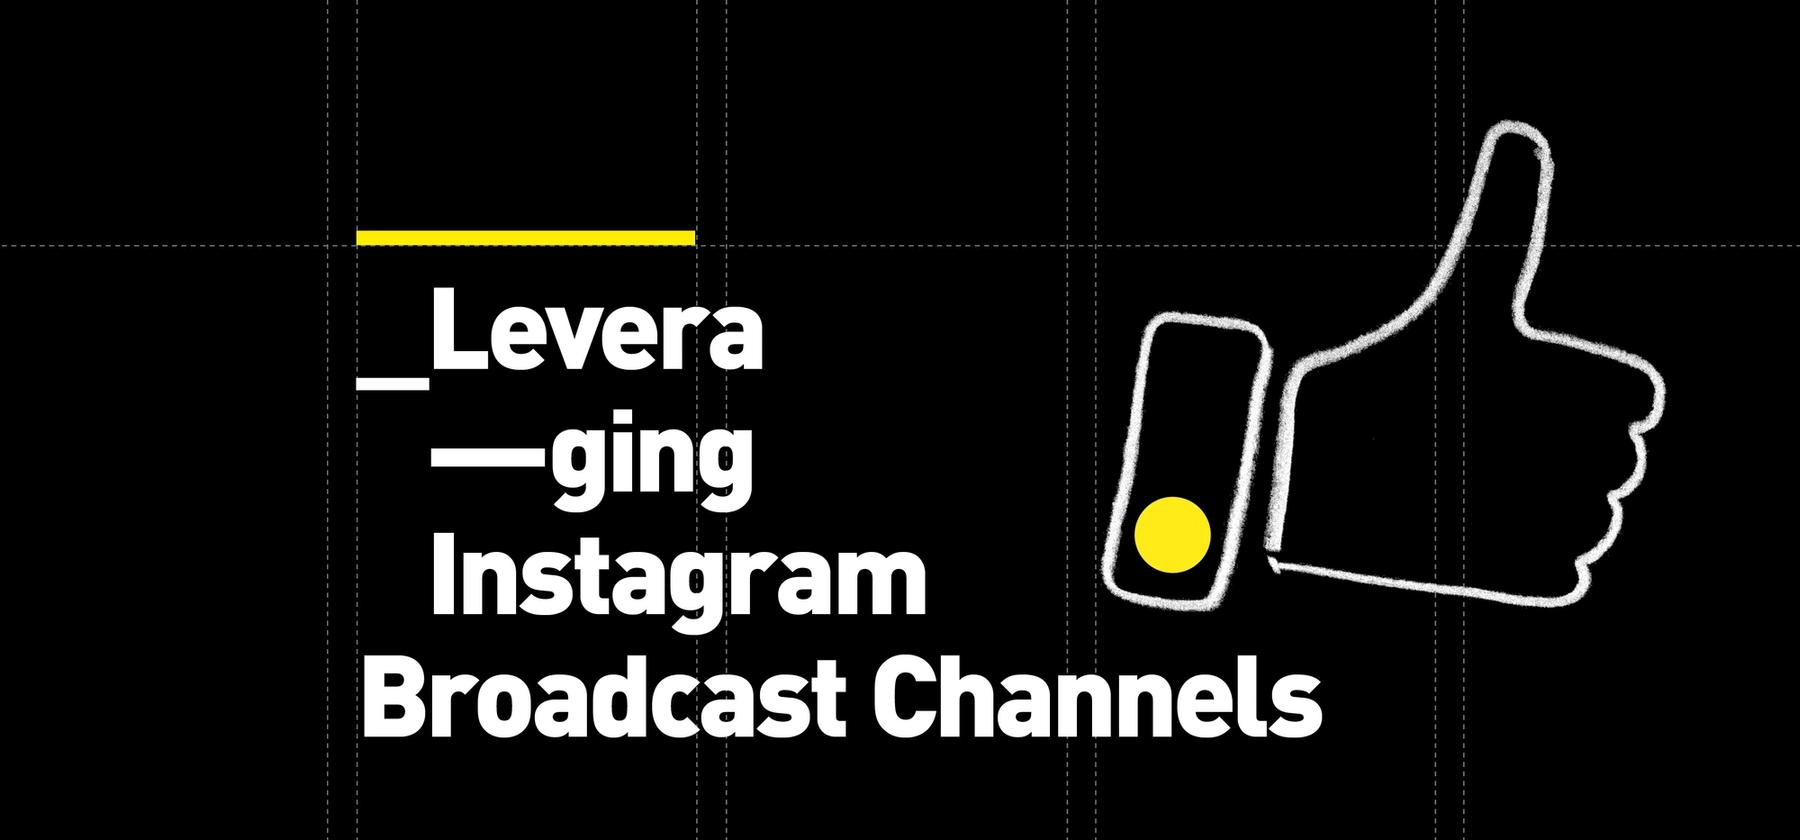 psLondon blog | Can Instagram broadcast channels support your marketing strategy?